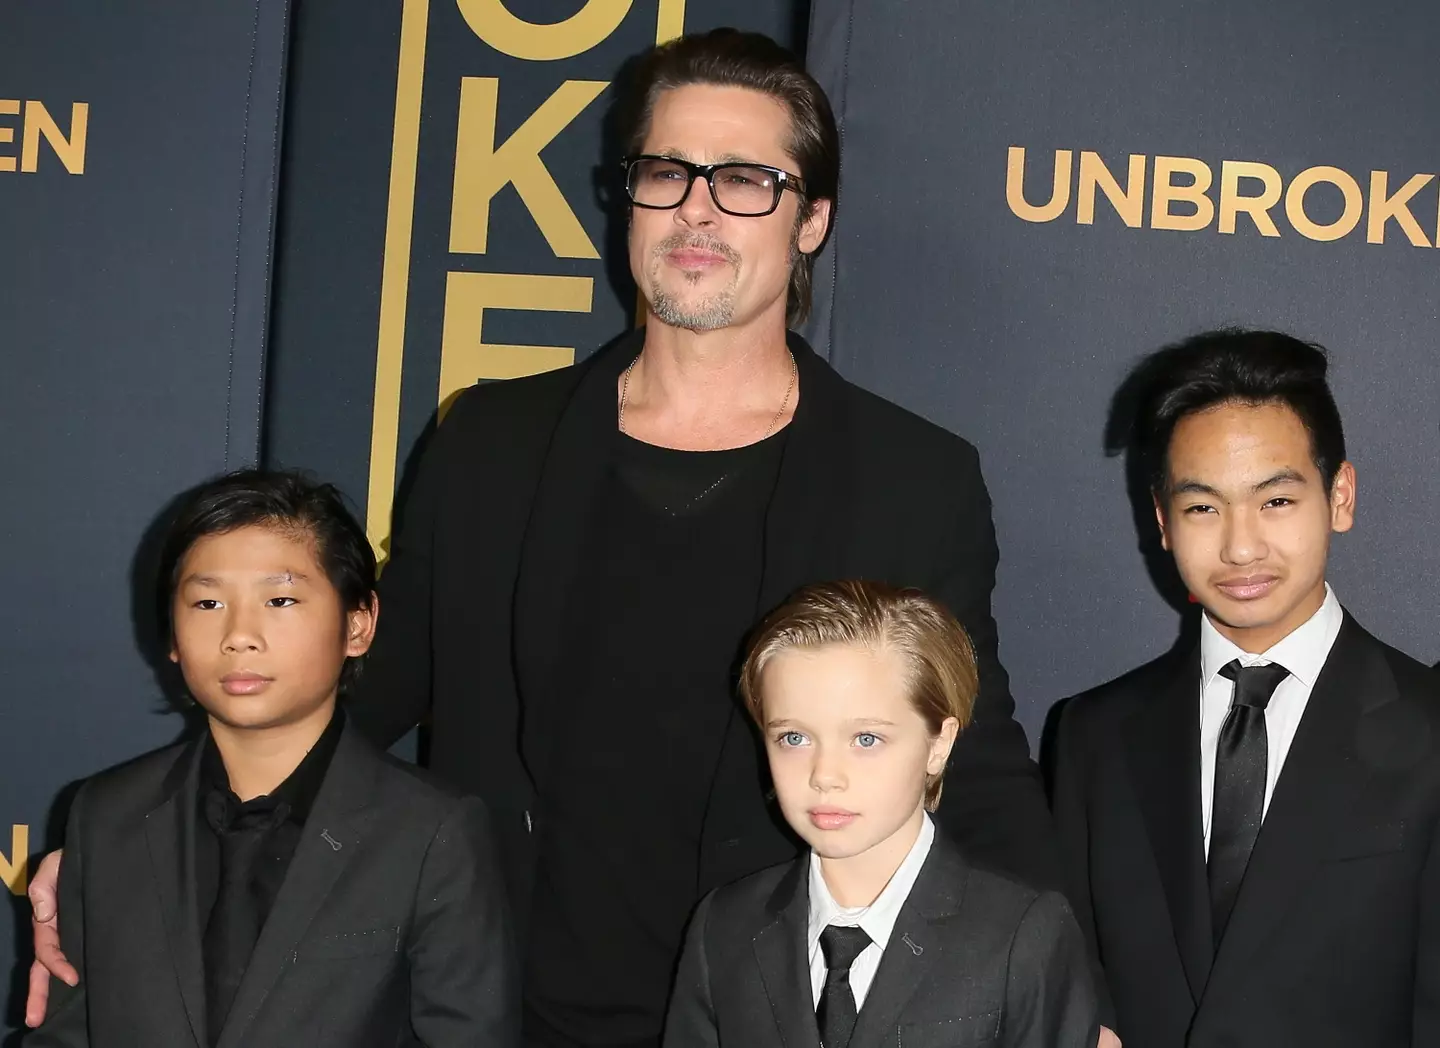 Brad Pitt pictured with his kids Pax, Shiloh and Maddox in 2014. (JB Lacroix/WireImage)